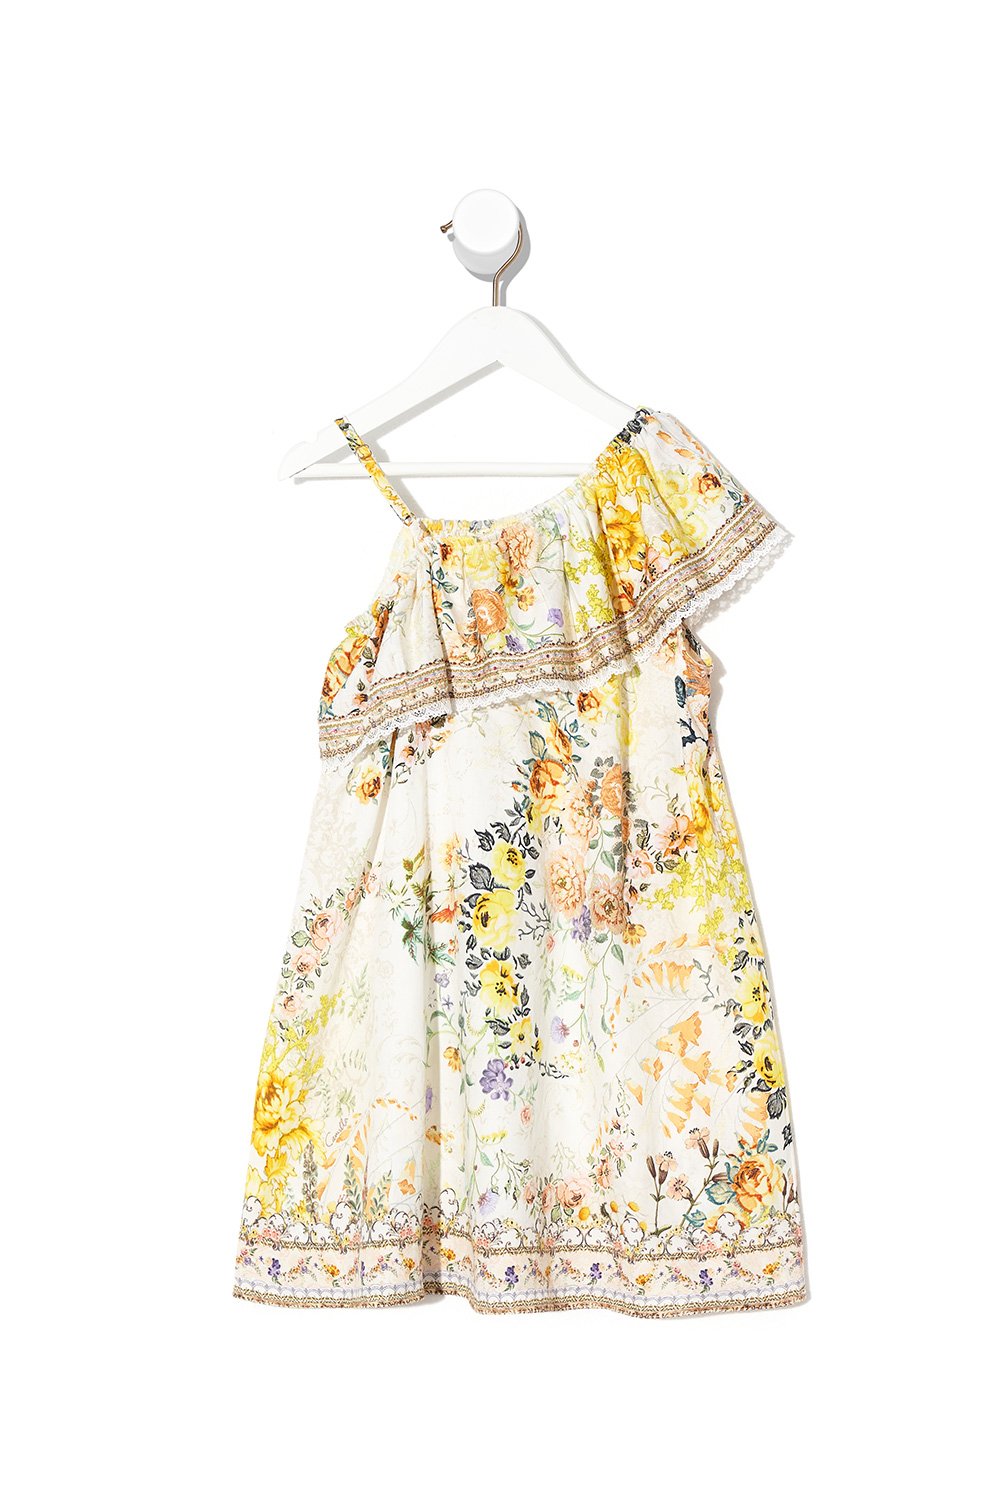 INFANTS ONE SHOULDER DRESS IN THE HILLS OF TUSCANY